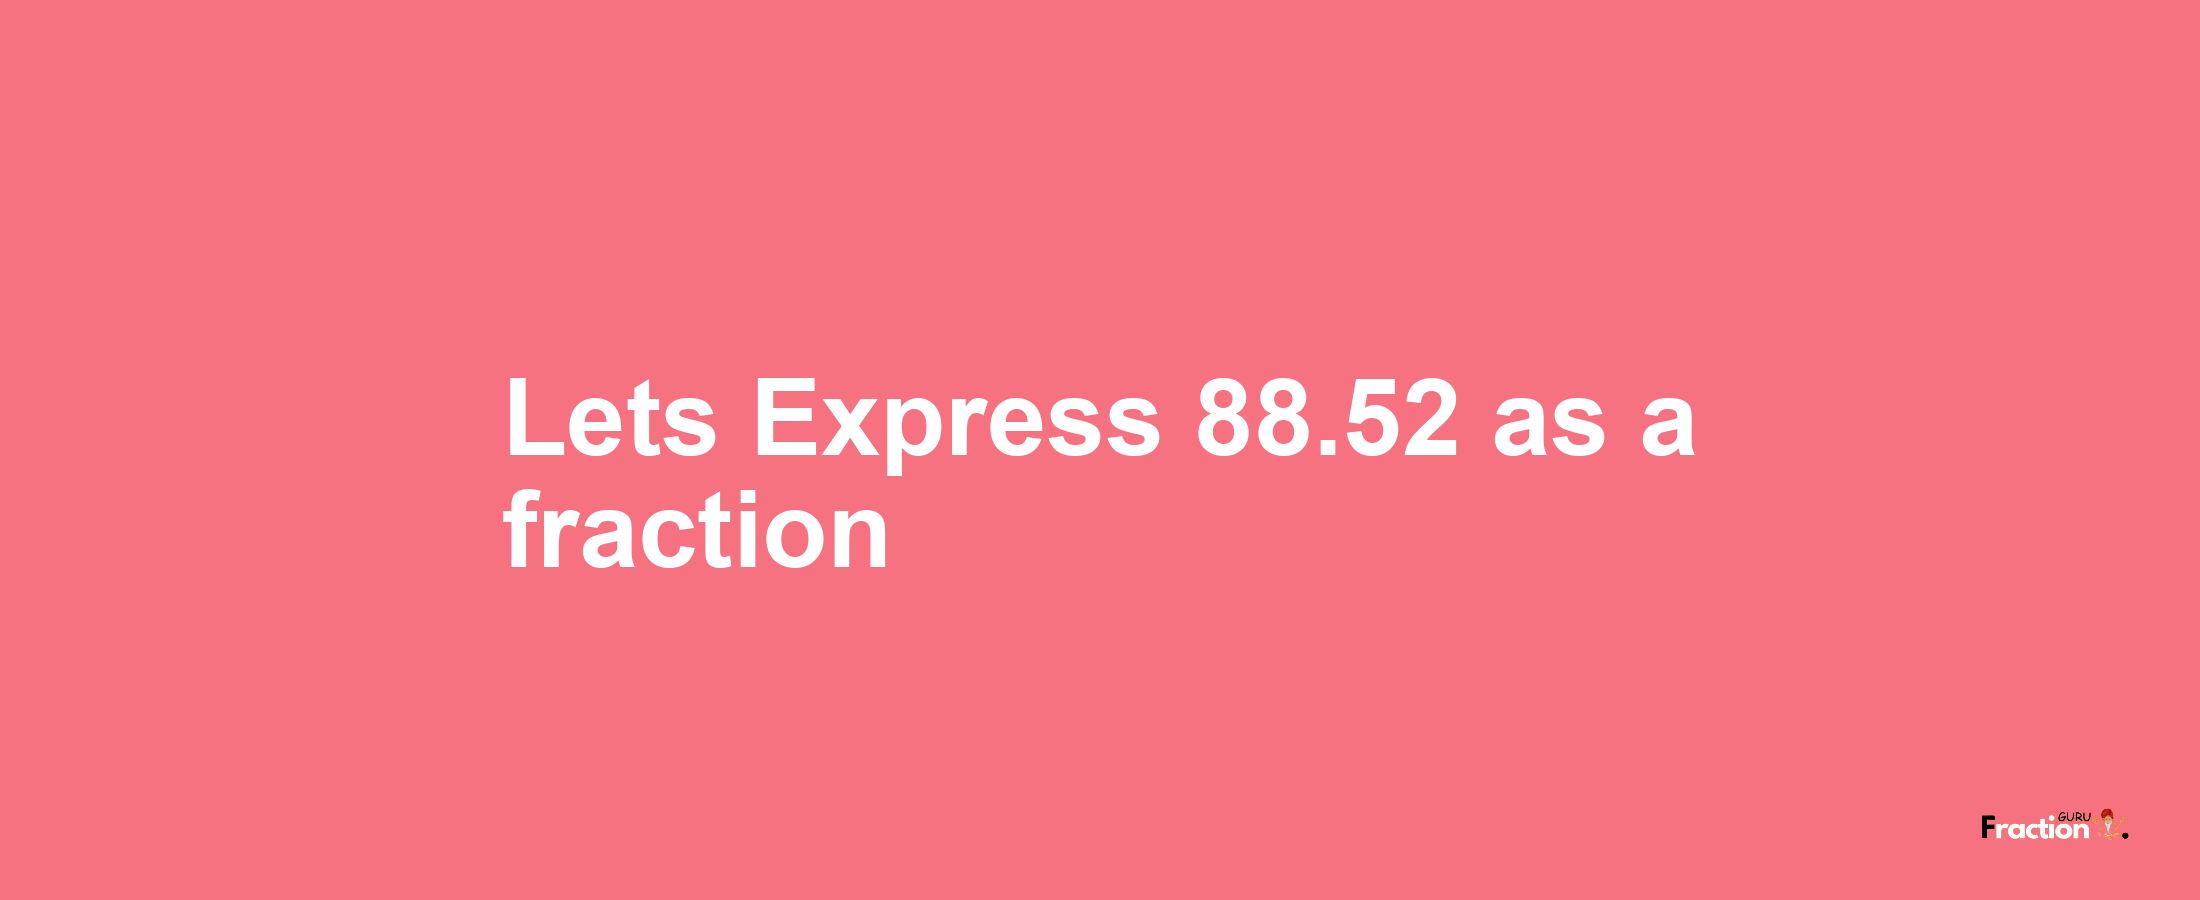 Lets Express 88.52 as afraction